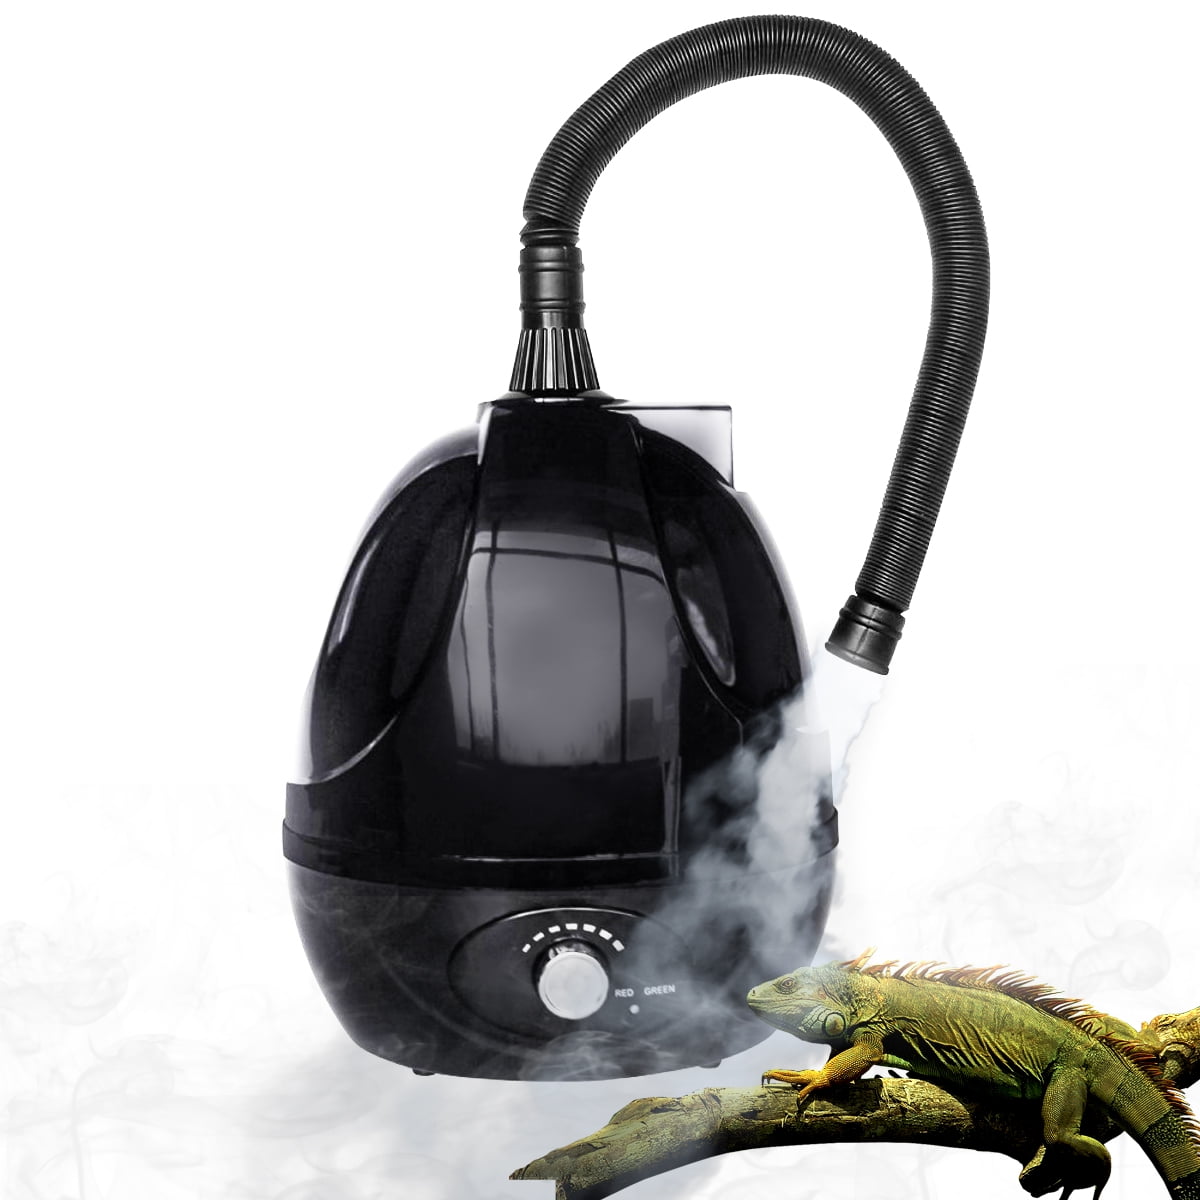 Amazon.com : Humidifier for Reptiles- Snake Humidifier Large Tank Terrarium  Fogger Mister Ultrasonic Premium Quite Operation Automatic Shut-Off Ideal  for Reptiles Amphibians and Herbs (3 Liter) : Pet Supplies